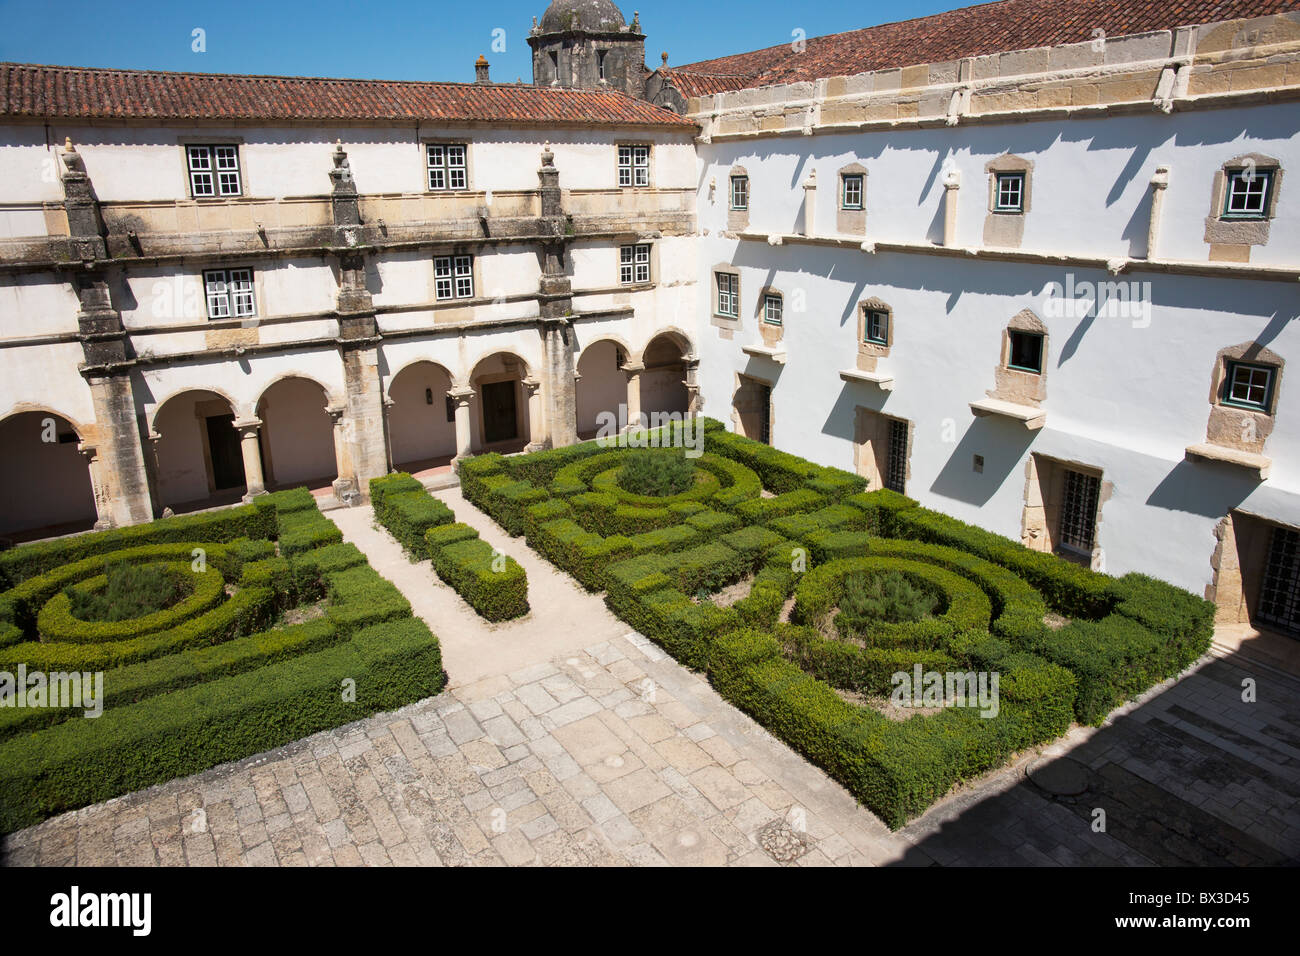 Cloisters In The Convent Of The Order Of Christ; Tomar, Portugal Stock Photo